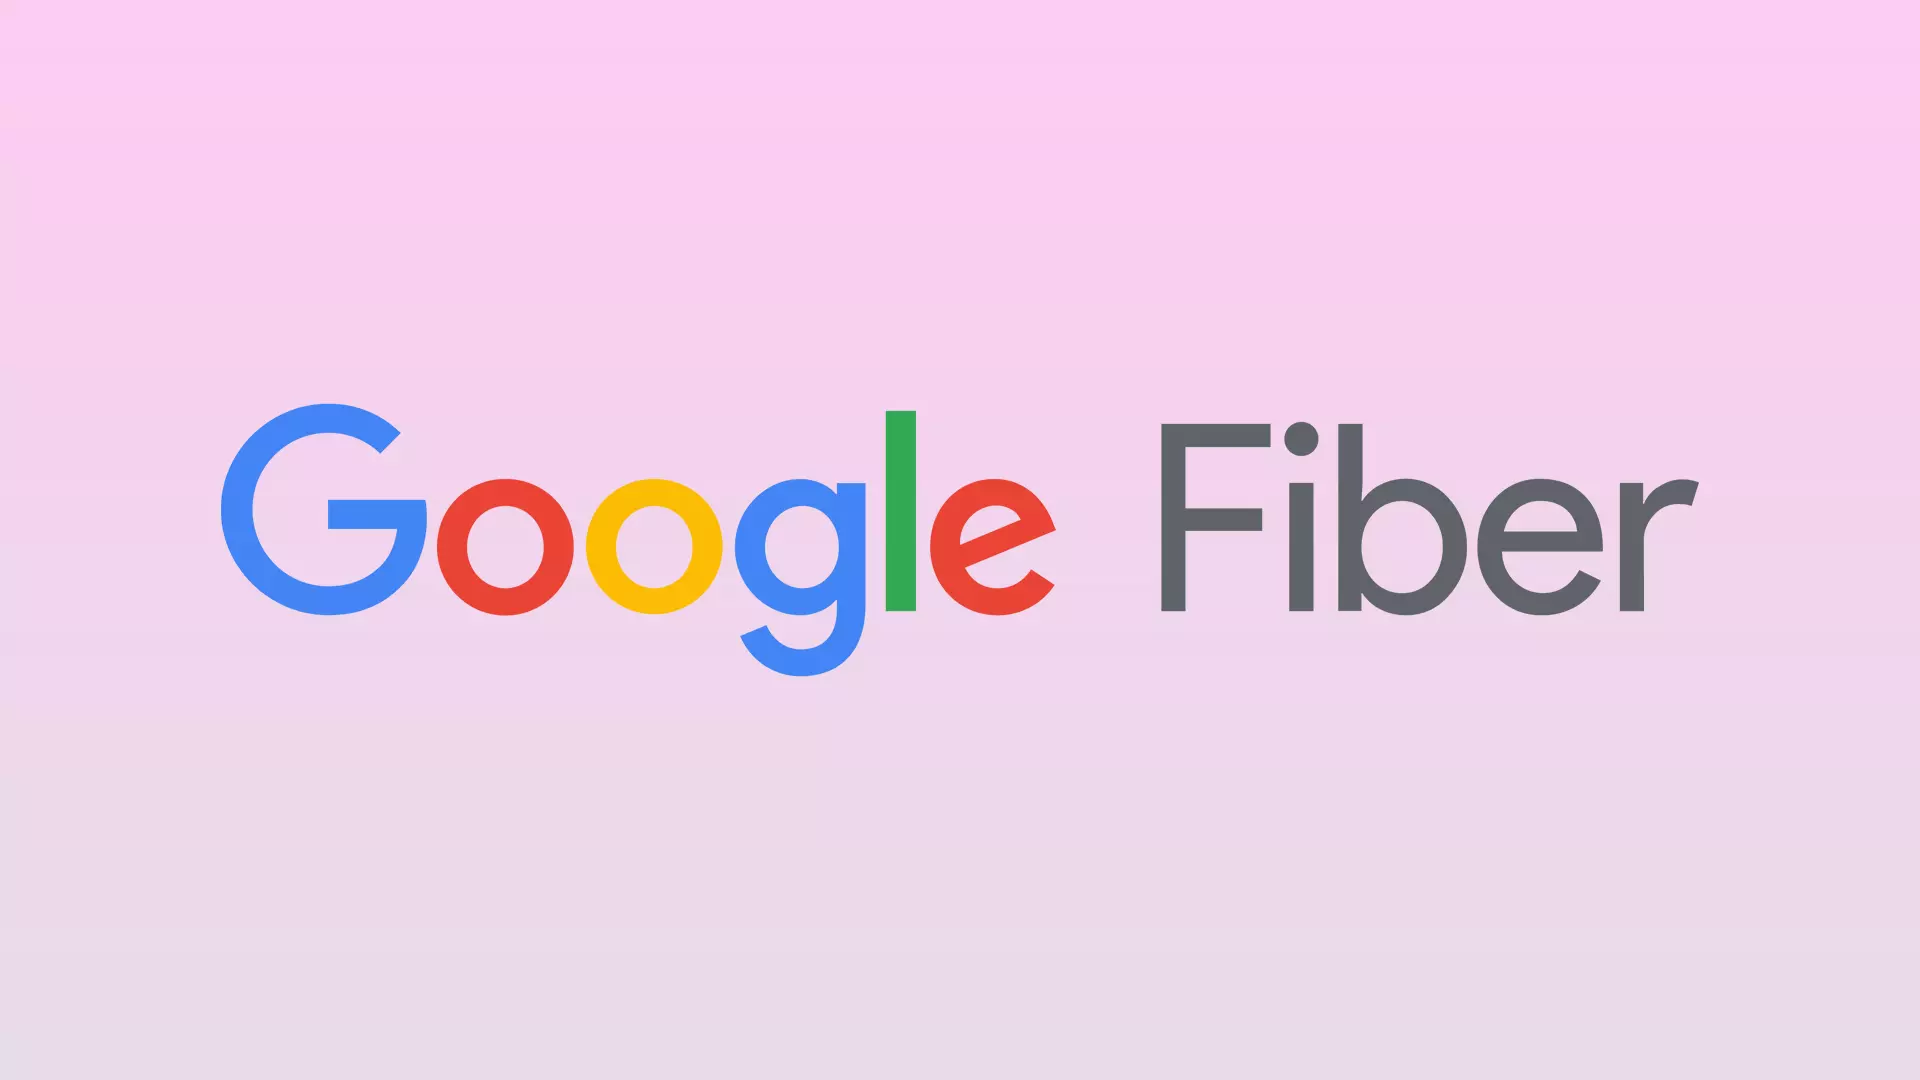 Google Fiber will offer new high-speed internet plans in early 2023